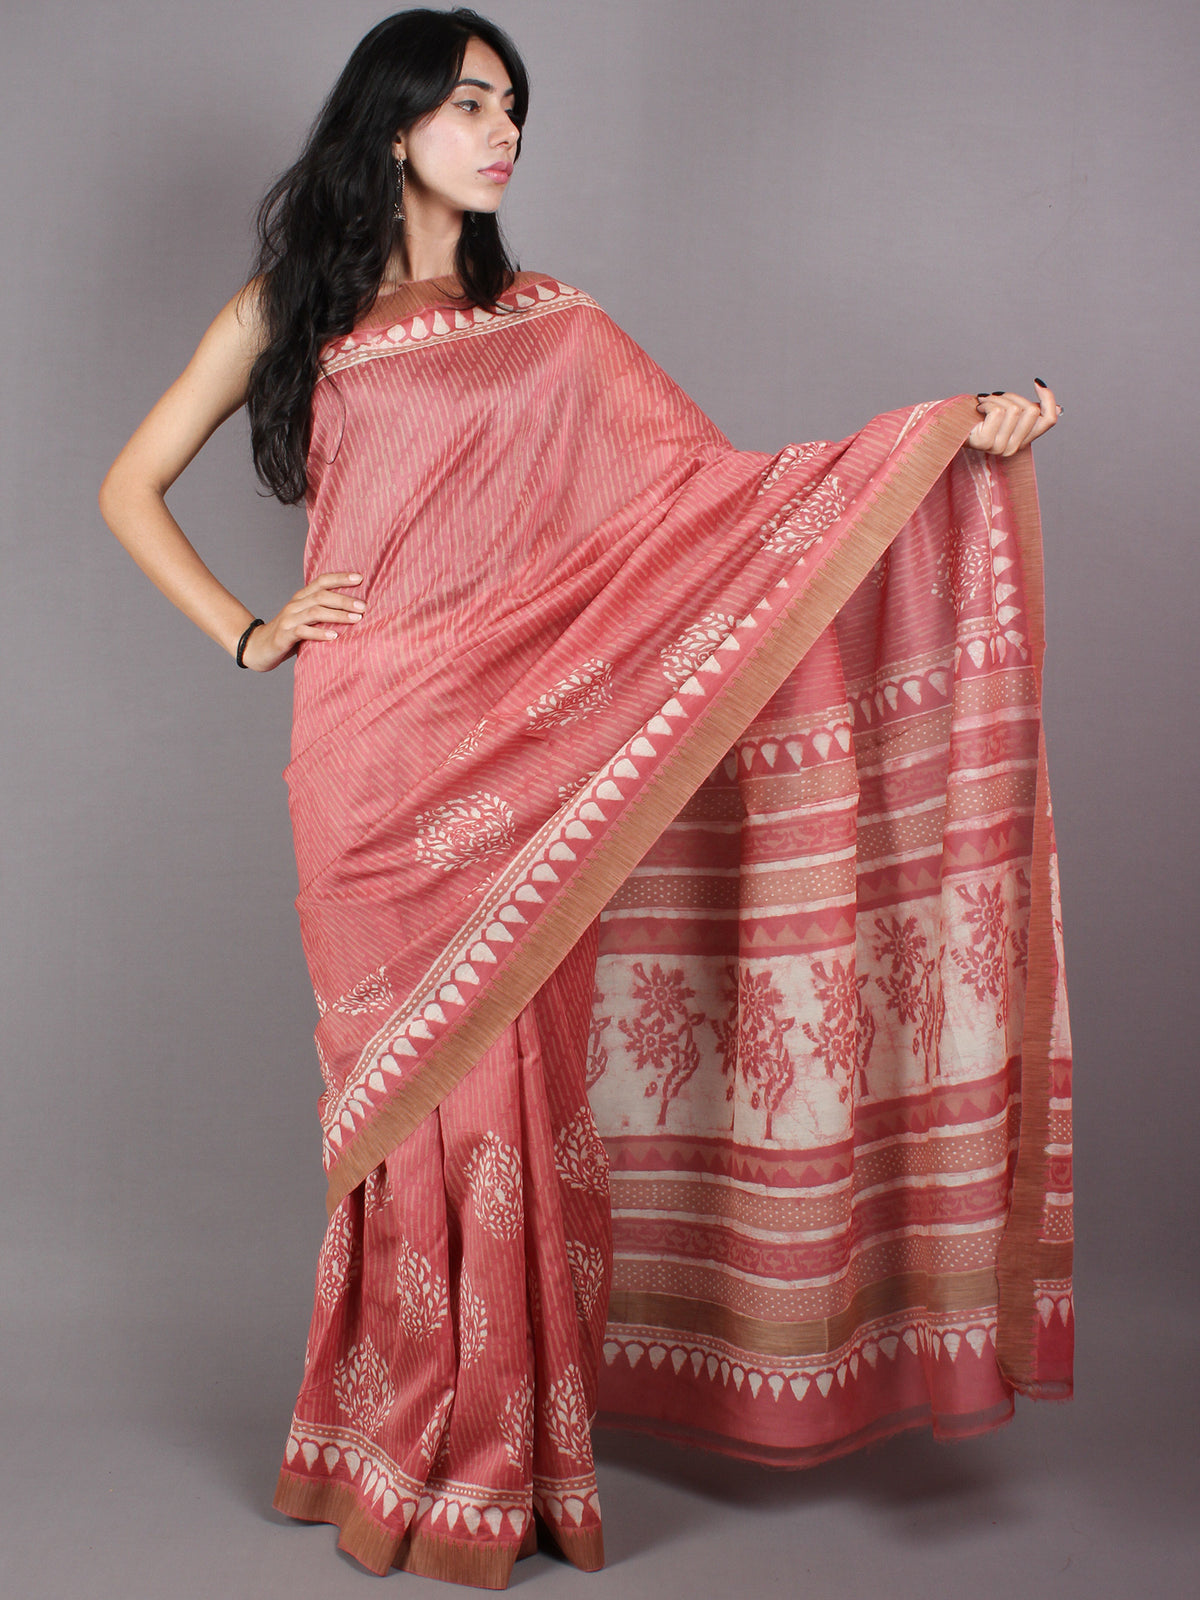 Pastel Peach Beige White Hand Block Printed in Natural Vegetable Colors Chanderi Saree With Geecha Border - S03170371